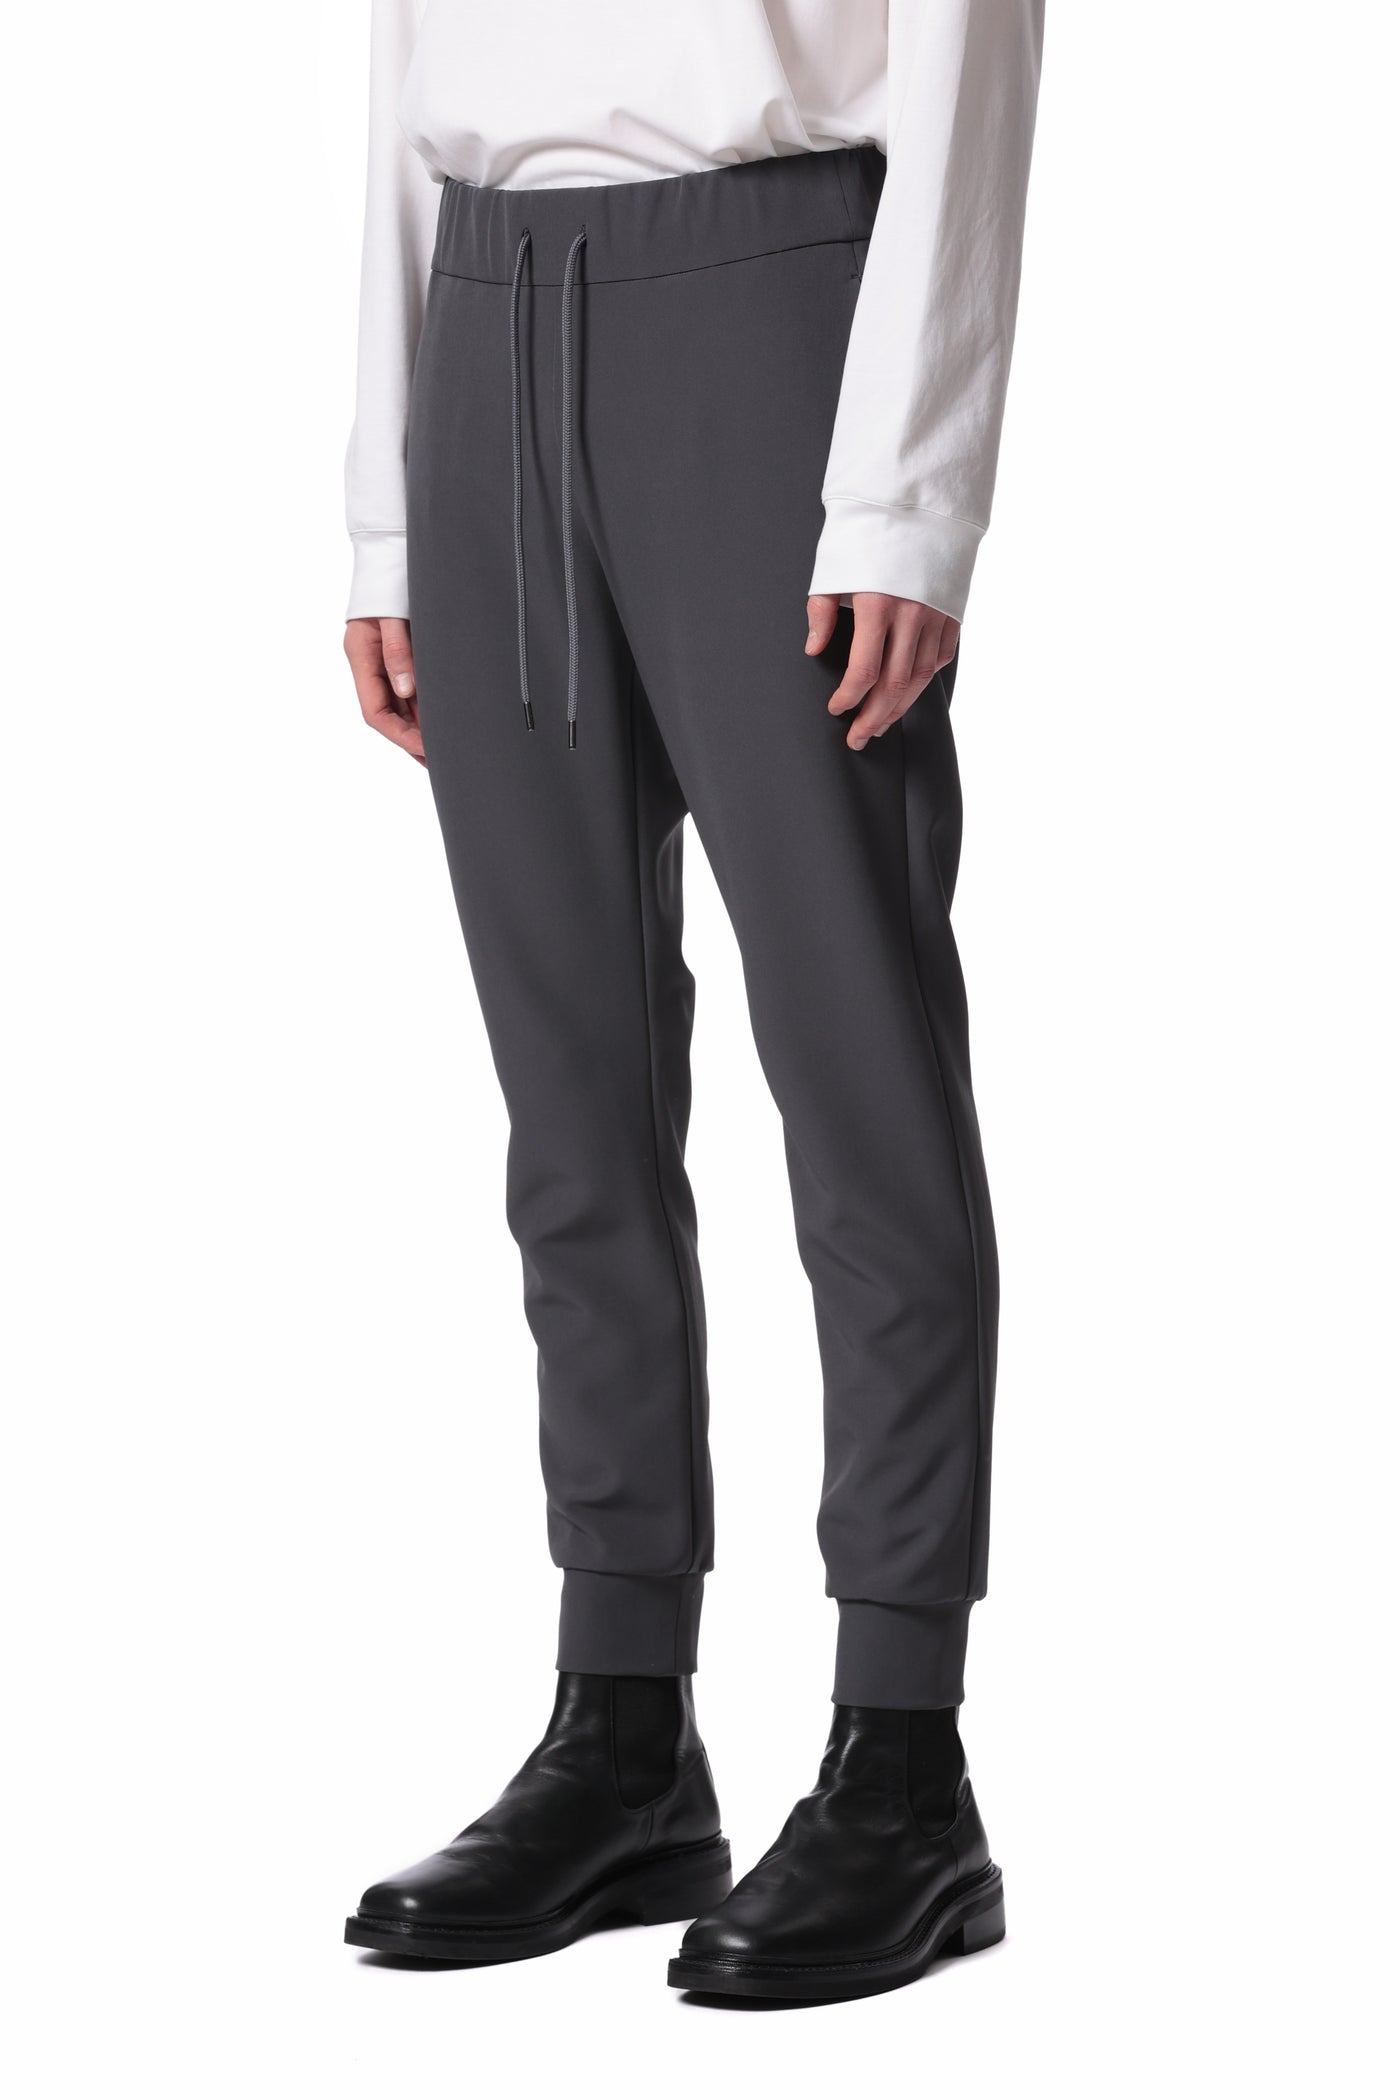 AP41-028 Polyester high count double cross jogger pants